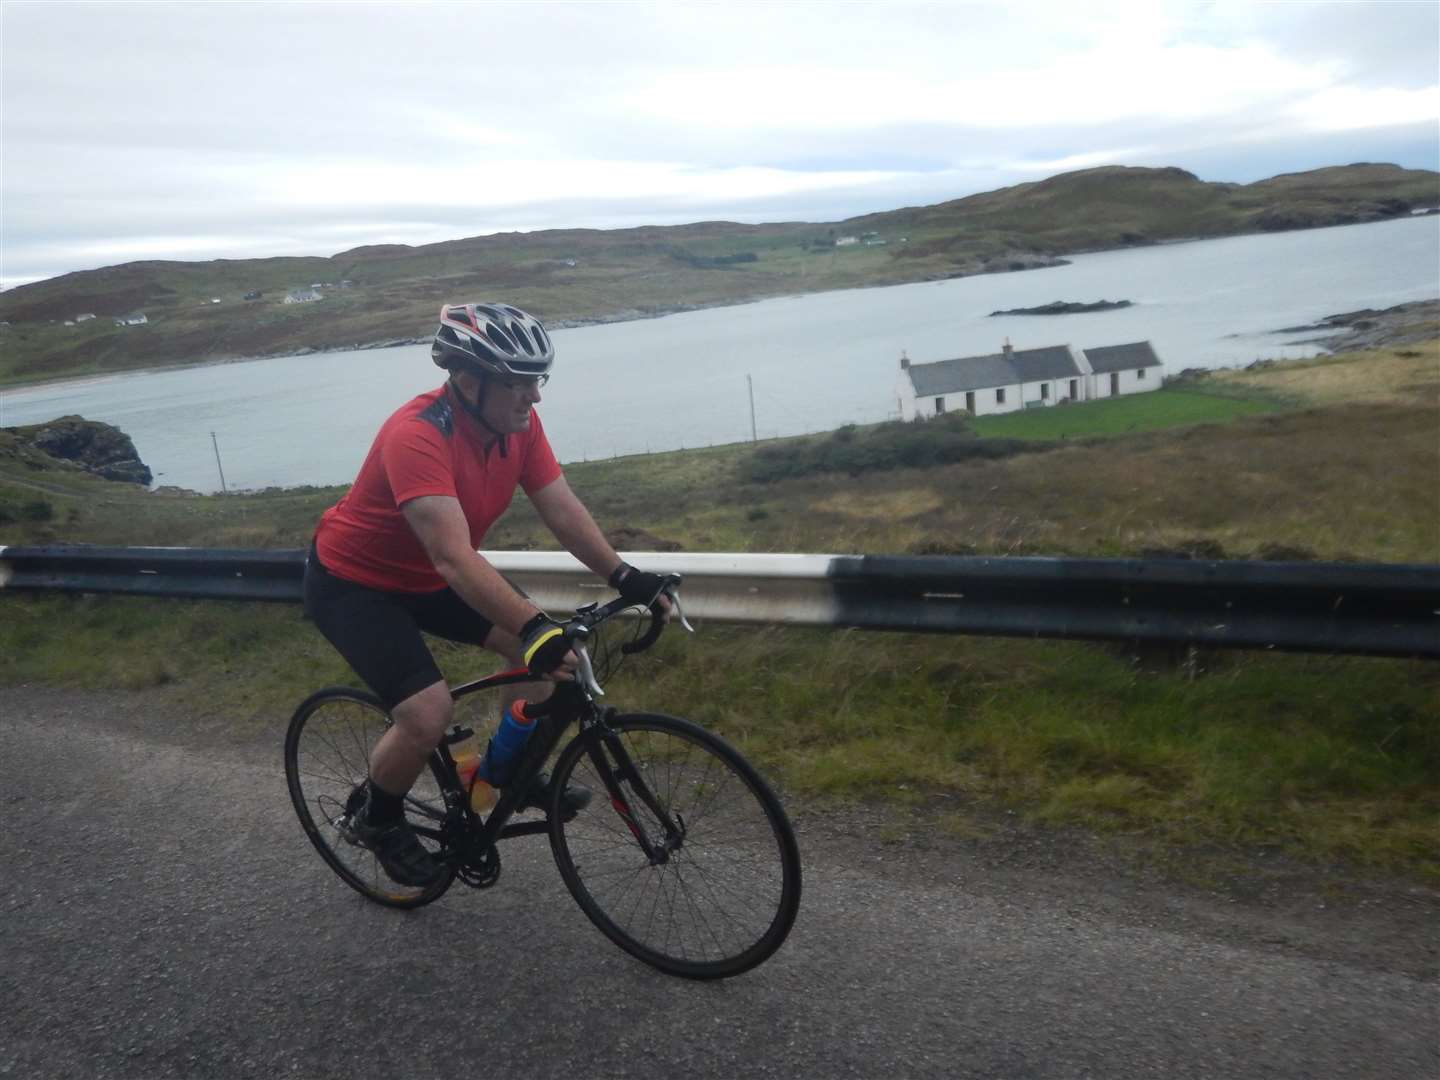 Mike Dunthorne of In Your Element, in his element on the North Coast 500.